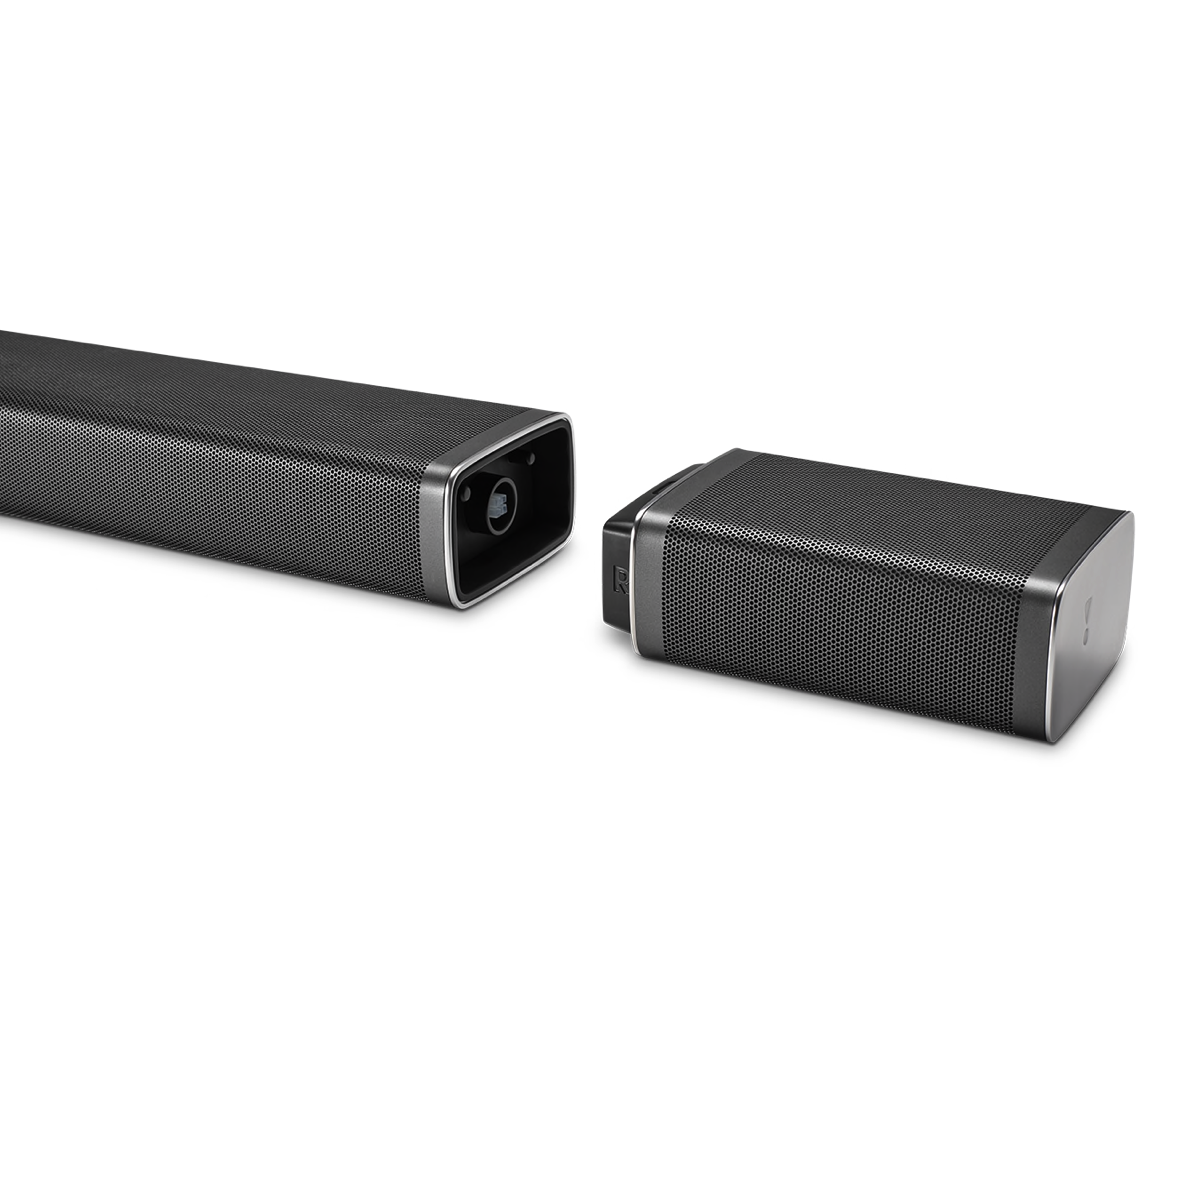 JBL Bar 5.1 - Soundbar and Subwoofer System with Detachachable Surrounds - AVStore